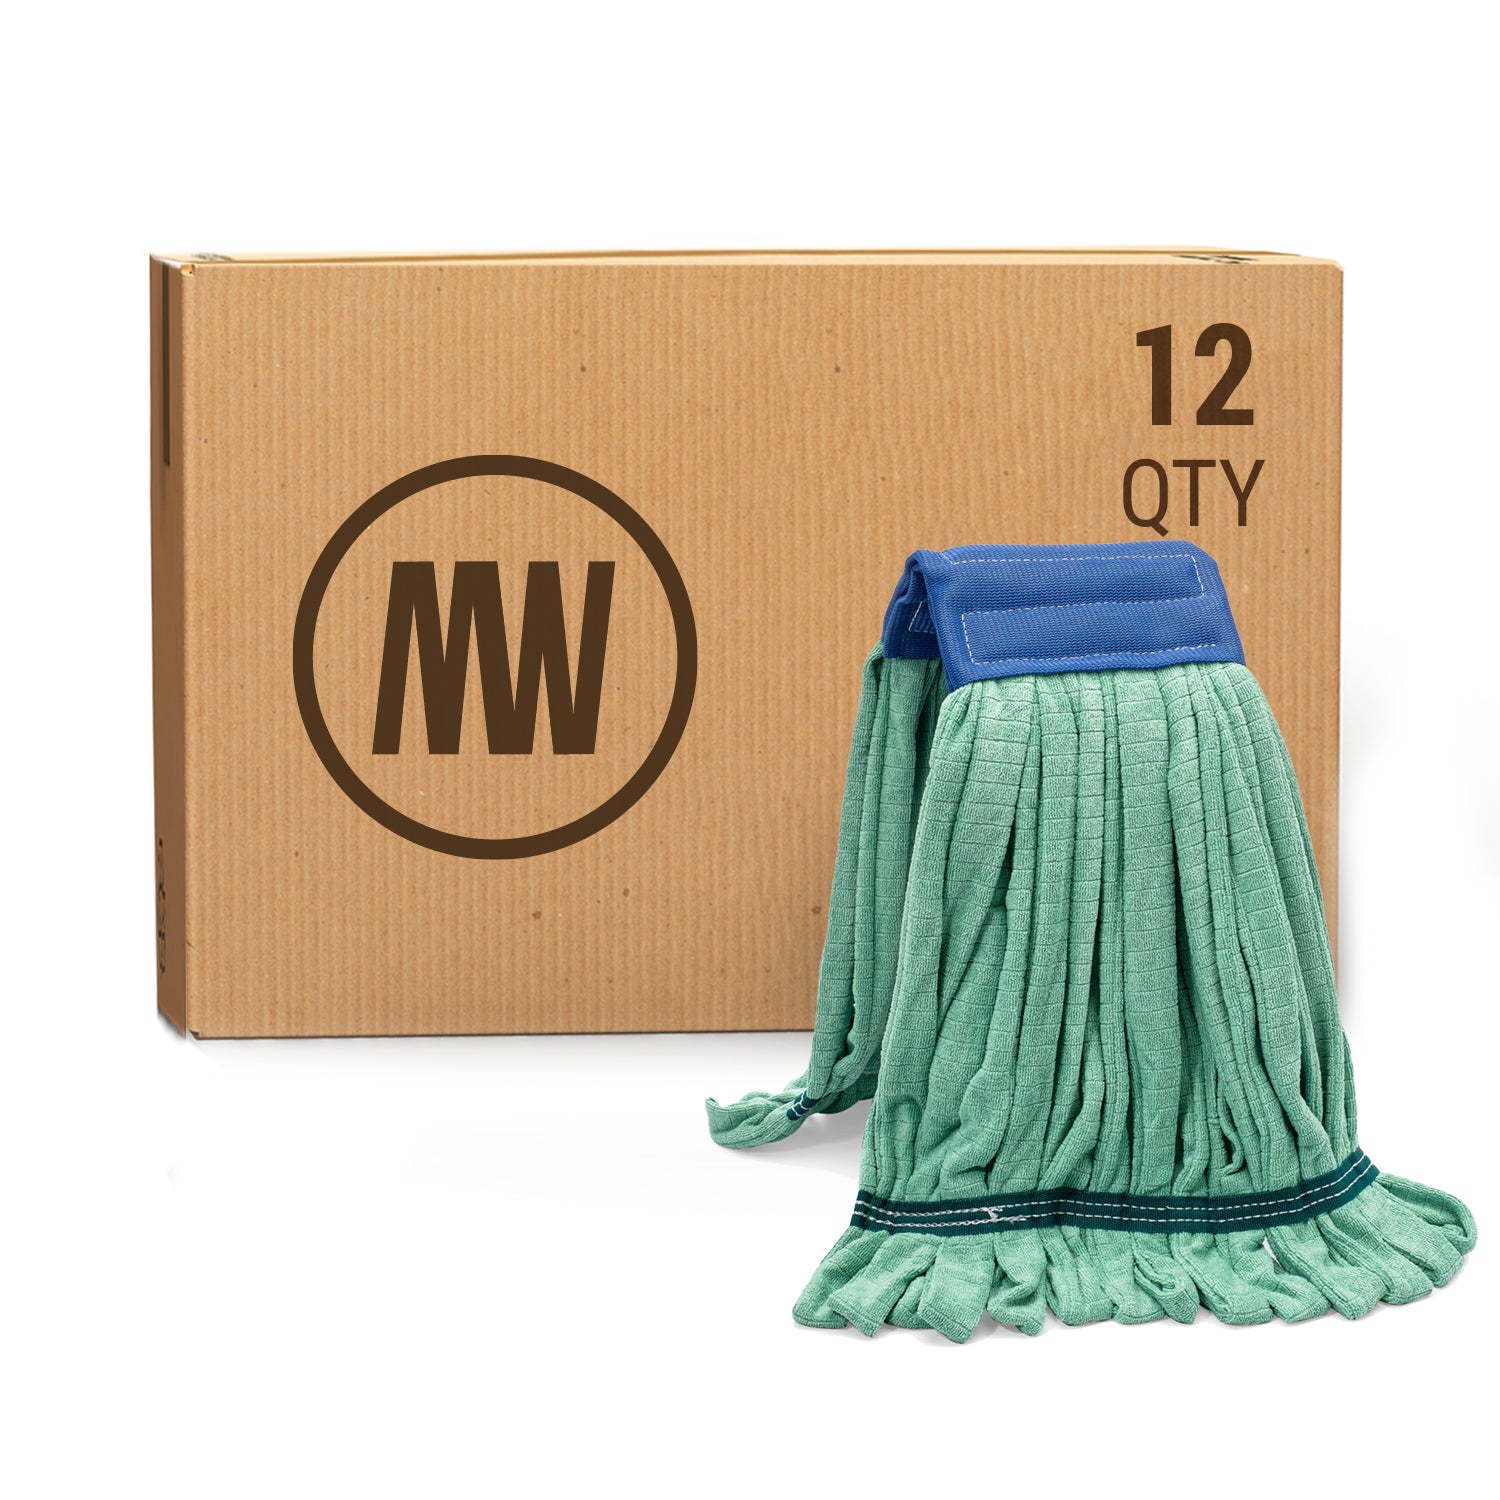 Large Commercial Microfiber Tube Mop - Case of 12